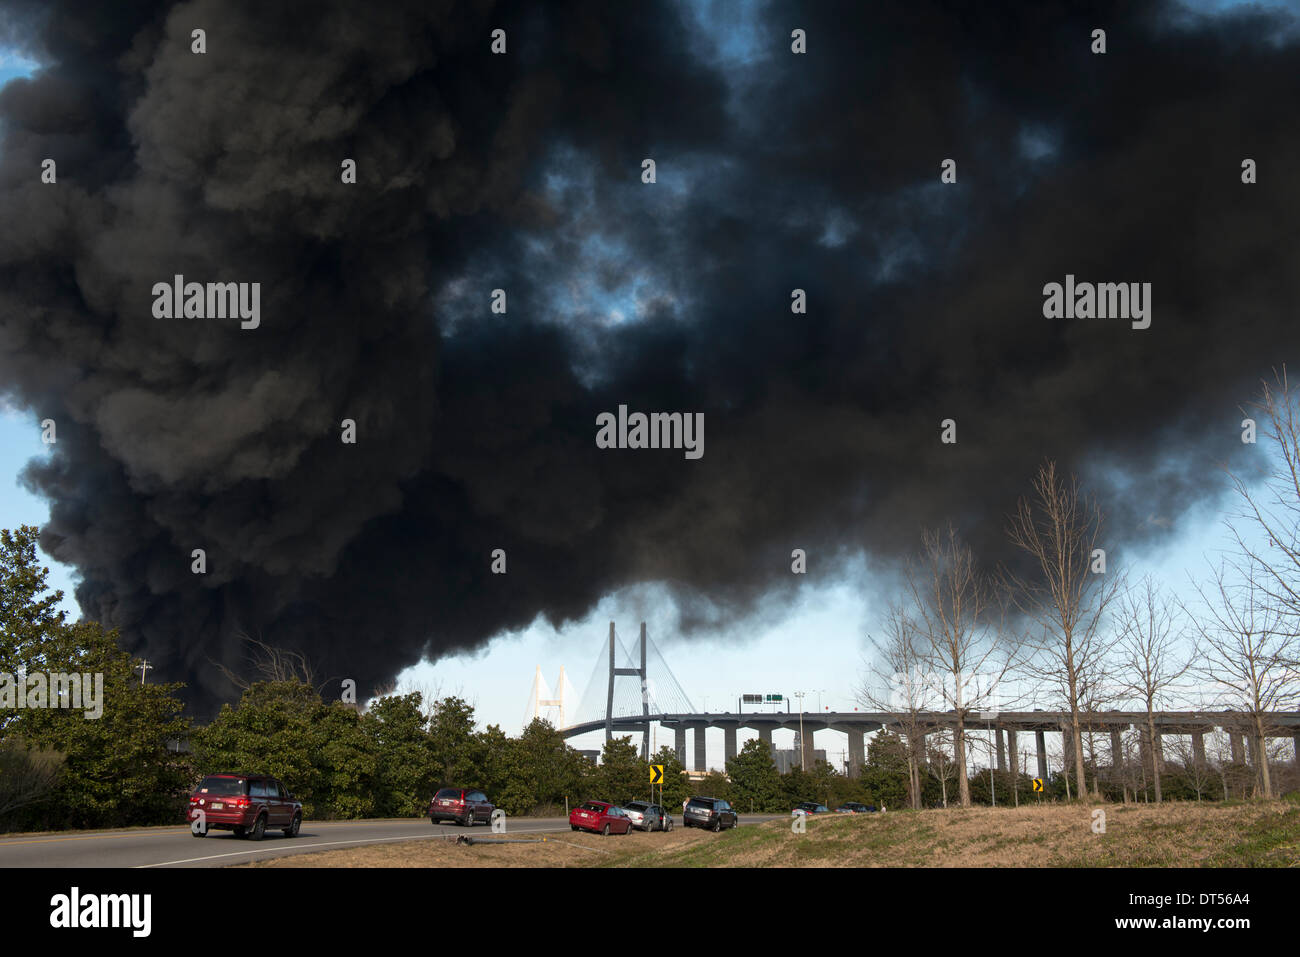 Savannah, Georgia, USA. 8th Fen, 2014. A warehouse fire at the Port of Savannah sends black smoke over Savannah, Georgia, U.S.A., on Saturday, February 8, 2014. Firefighters worked to contain and extinguish the blaze that erupted at the port’s Ocean Terminal not far from downtown Savannah. Credit:  JT Blatty/Alamy Live News Stock Photo